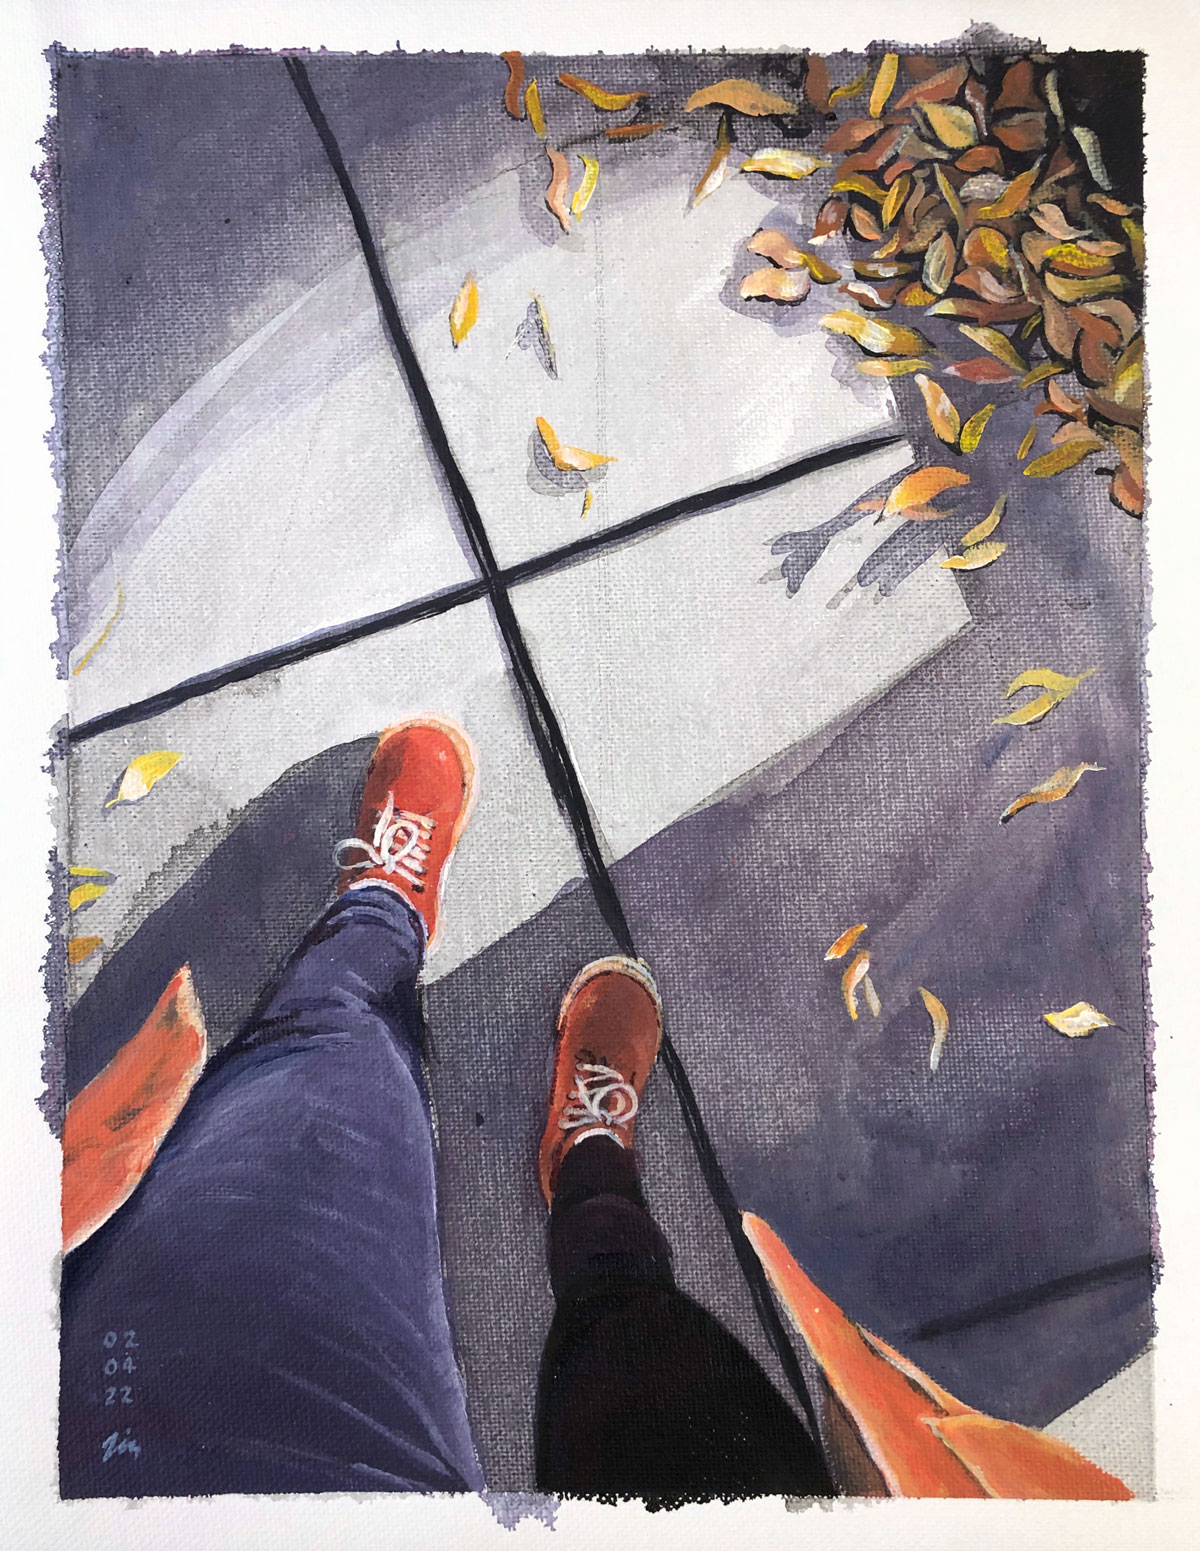 Pedestrian #2, an ink and acrylic painting by Liz Broekhuyse